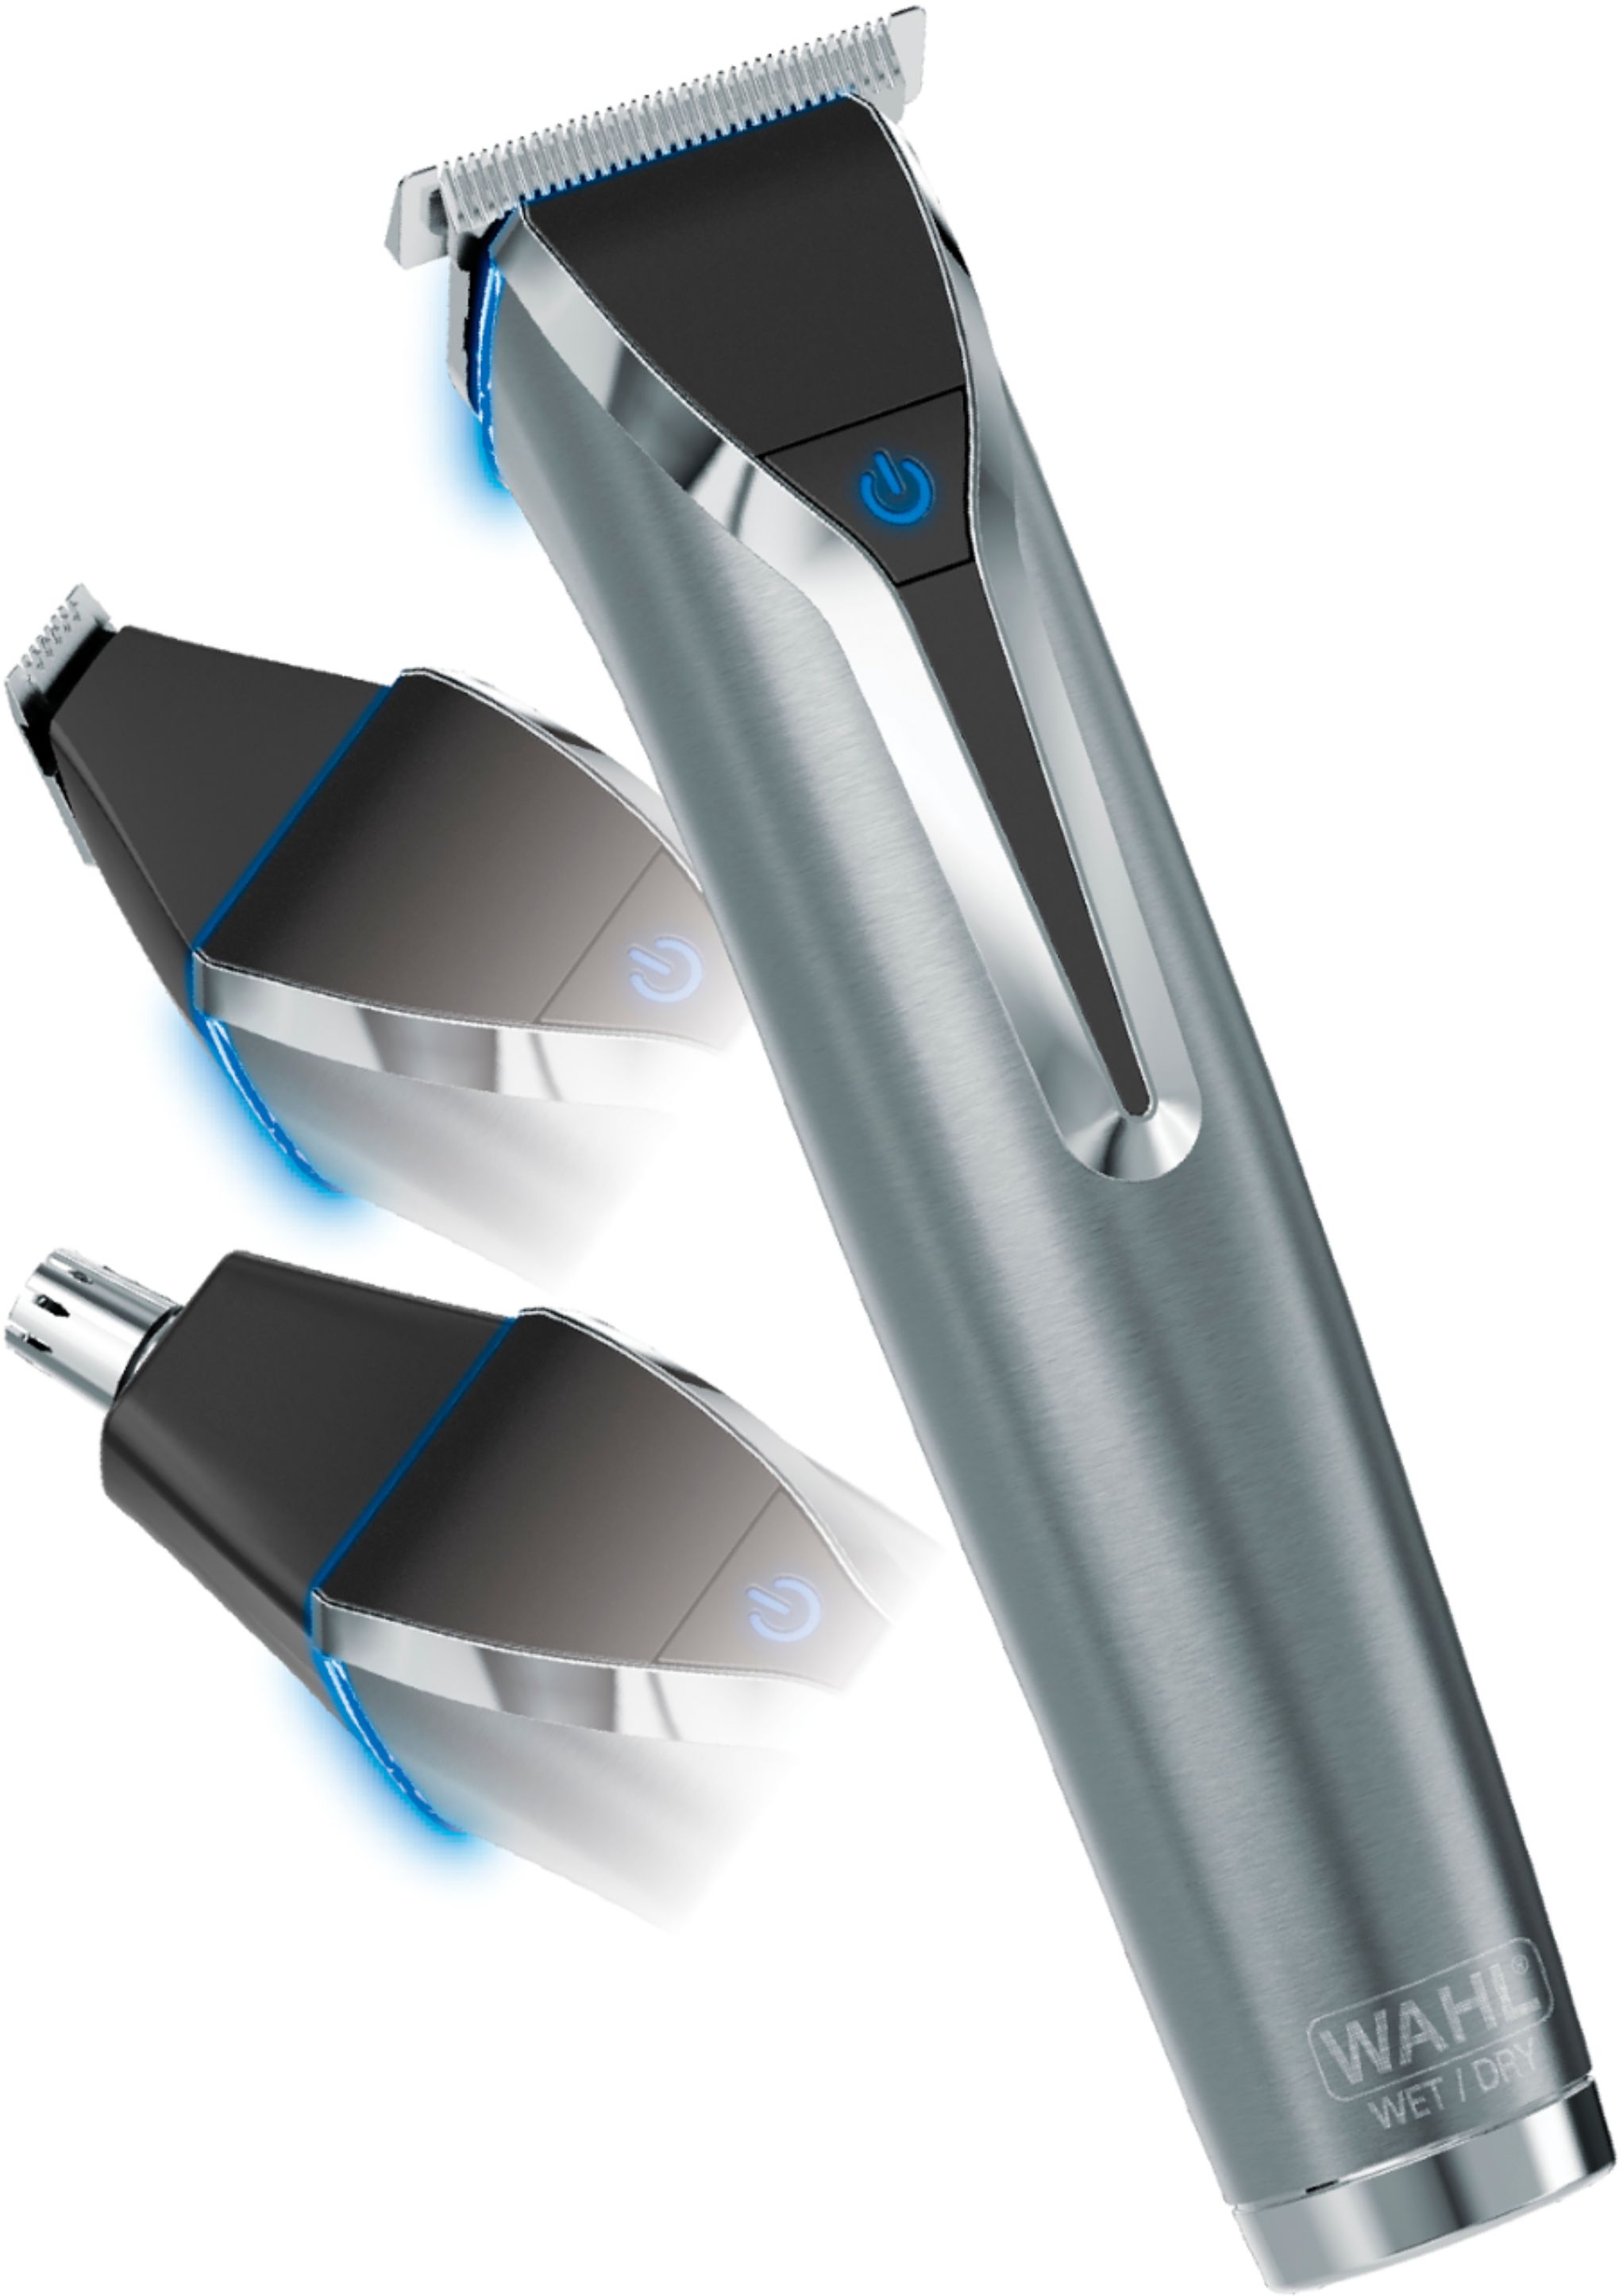 Angle View: Wahl - Stainless Steel LI Trimmer - 09898 - Silver - Stainless Steel